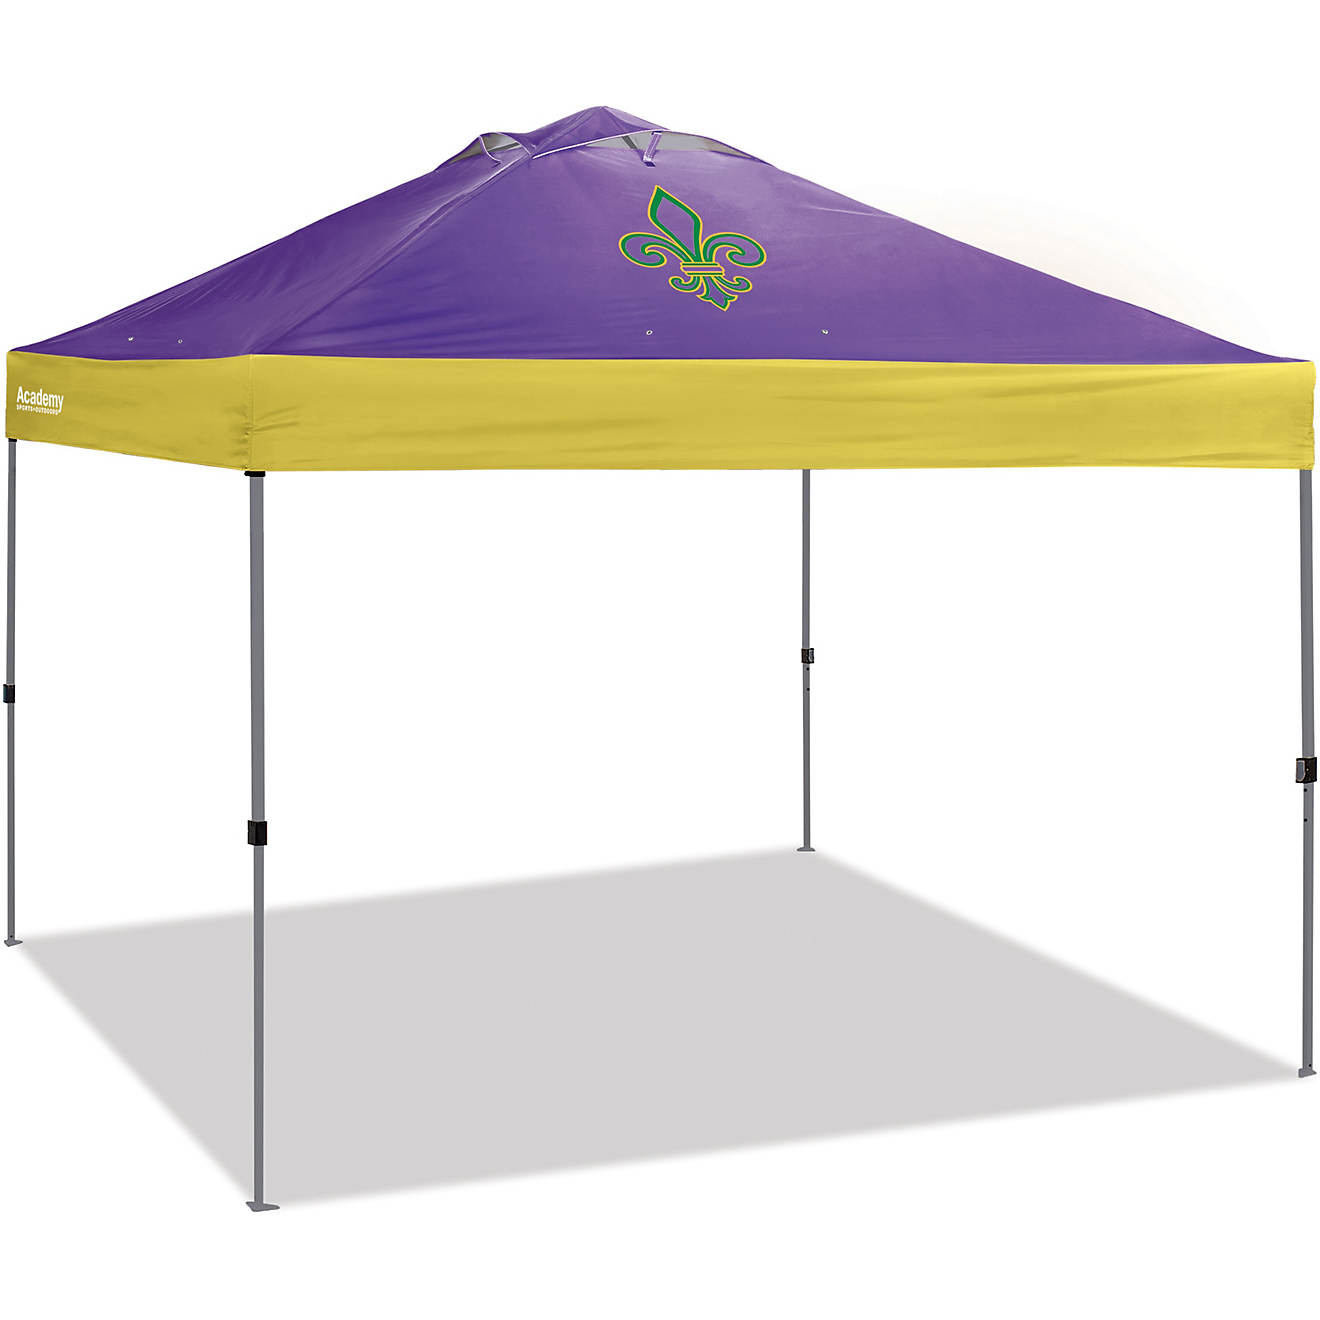 Academy Sports + Outdoors 10 ft x 10 ft One Push Straight Leg Fleur-De-Lis State Canopy                                          - view number 1